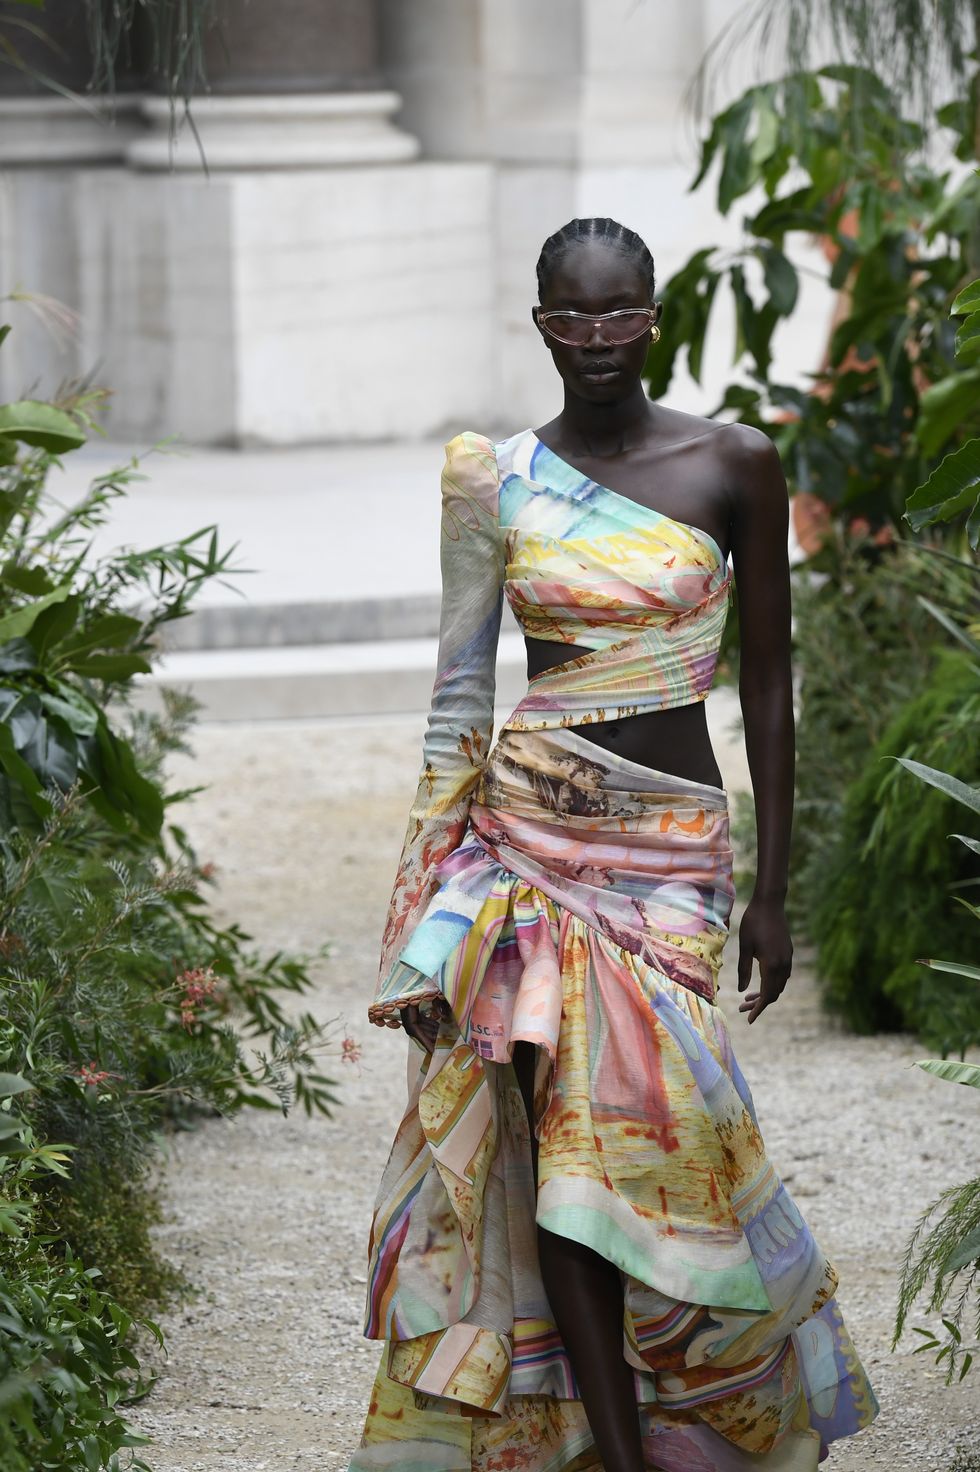 runway at zimmermann rtw spring 2023 photographed on october 3, 2022 in paris, france photo by dominique maîtrewwdpenske media via getty images